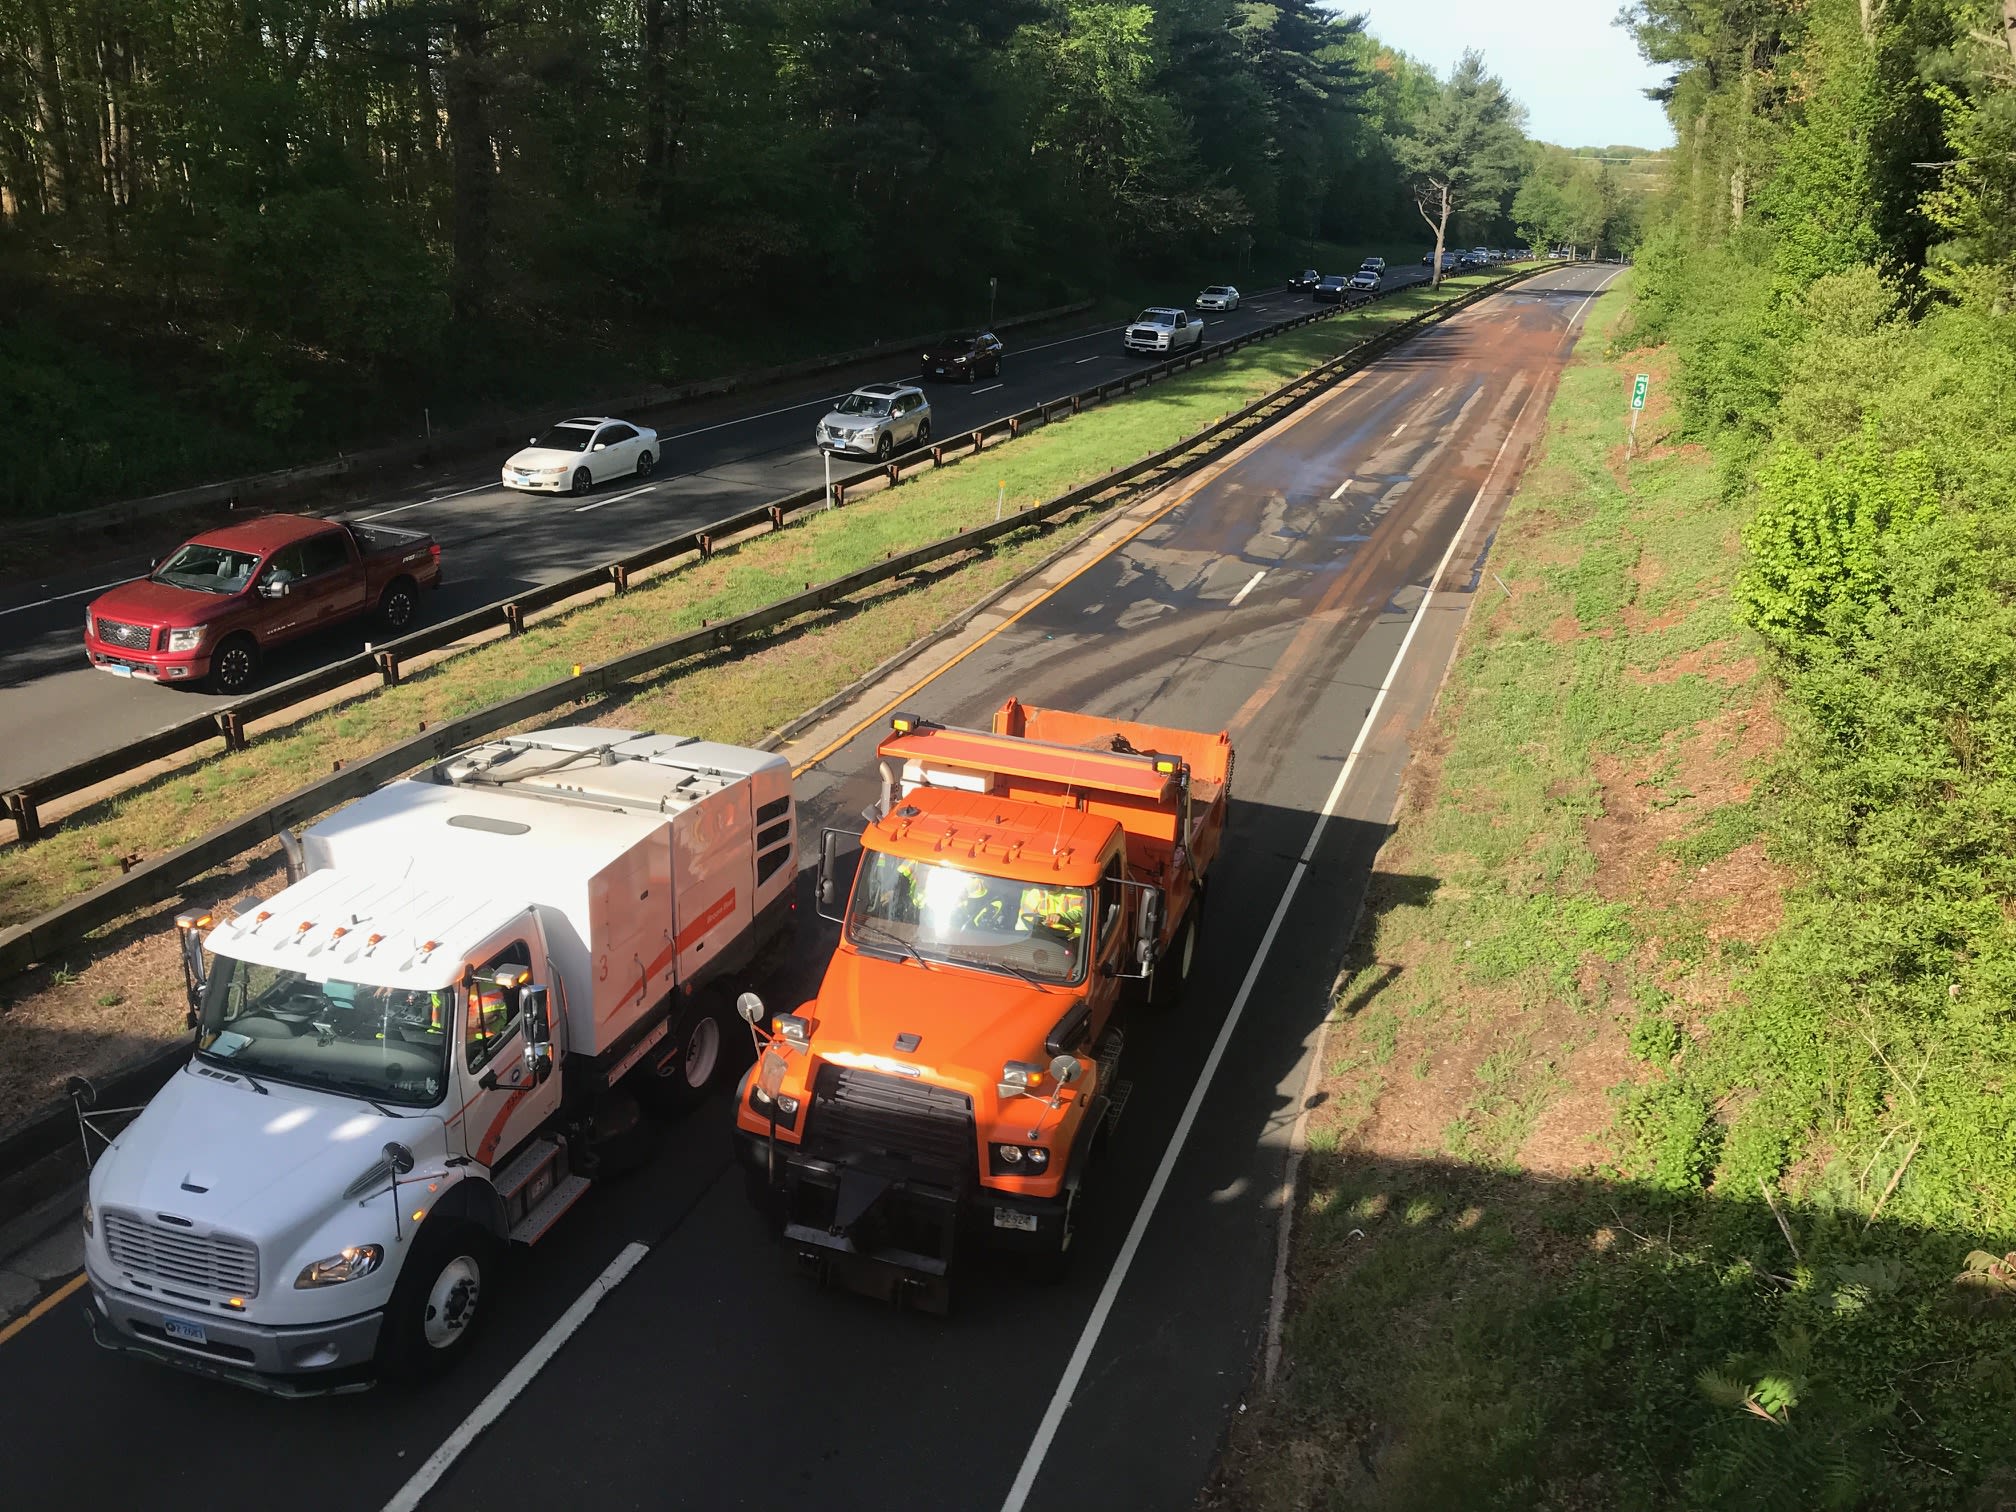 Fatal wrong-way crash on Merritt Parkway in Stratford: What we know and don't know